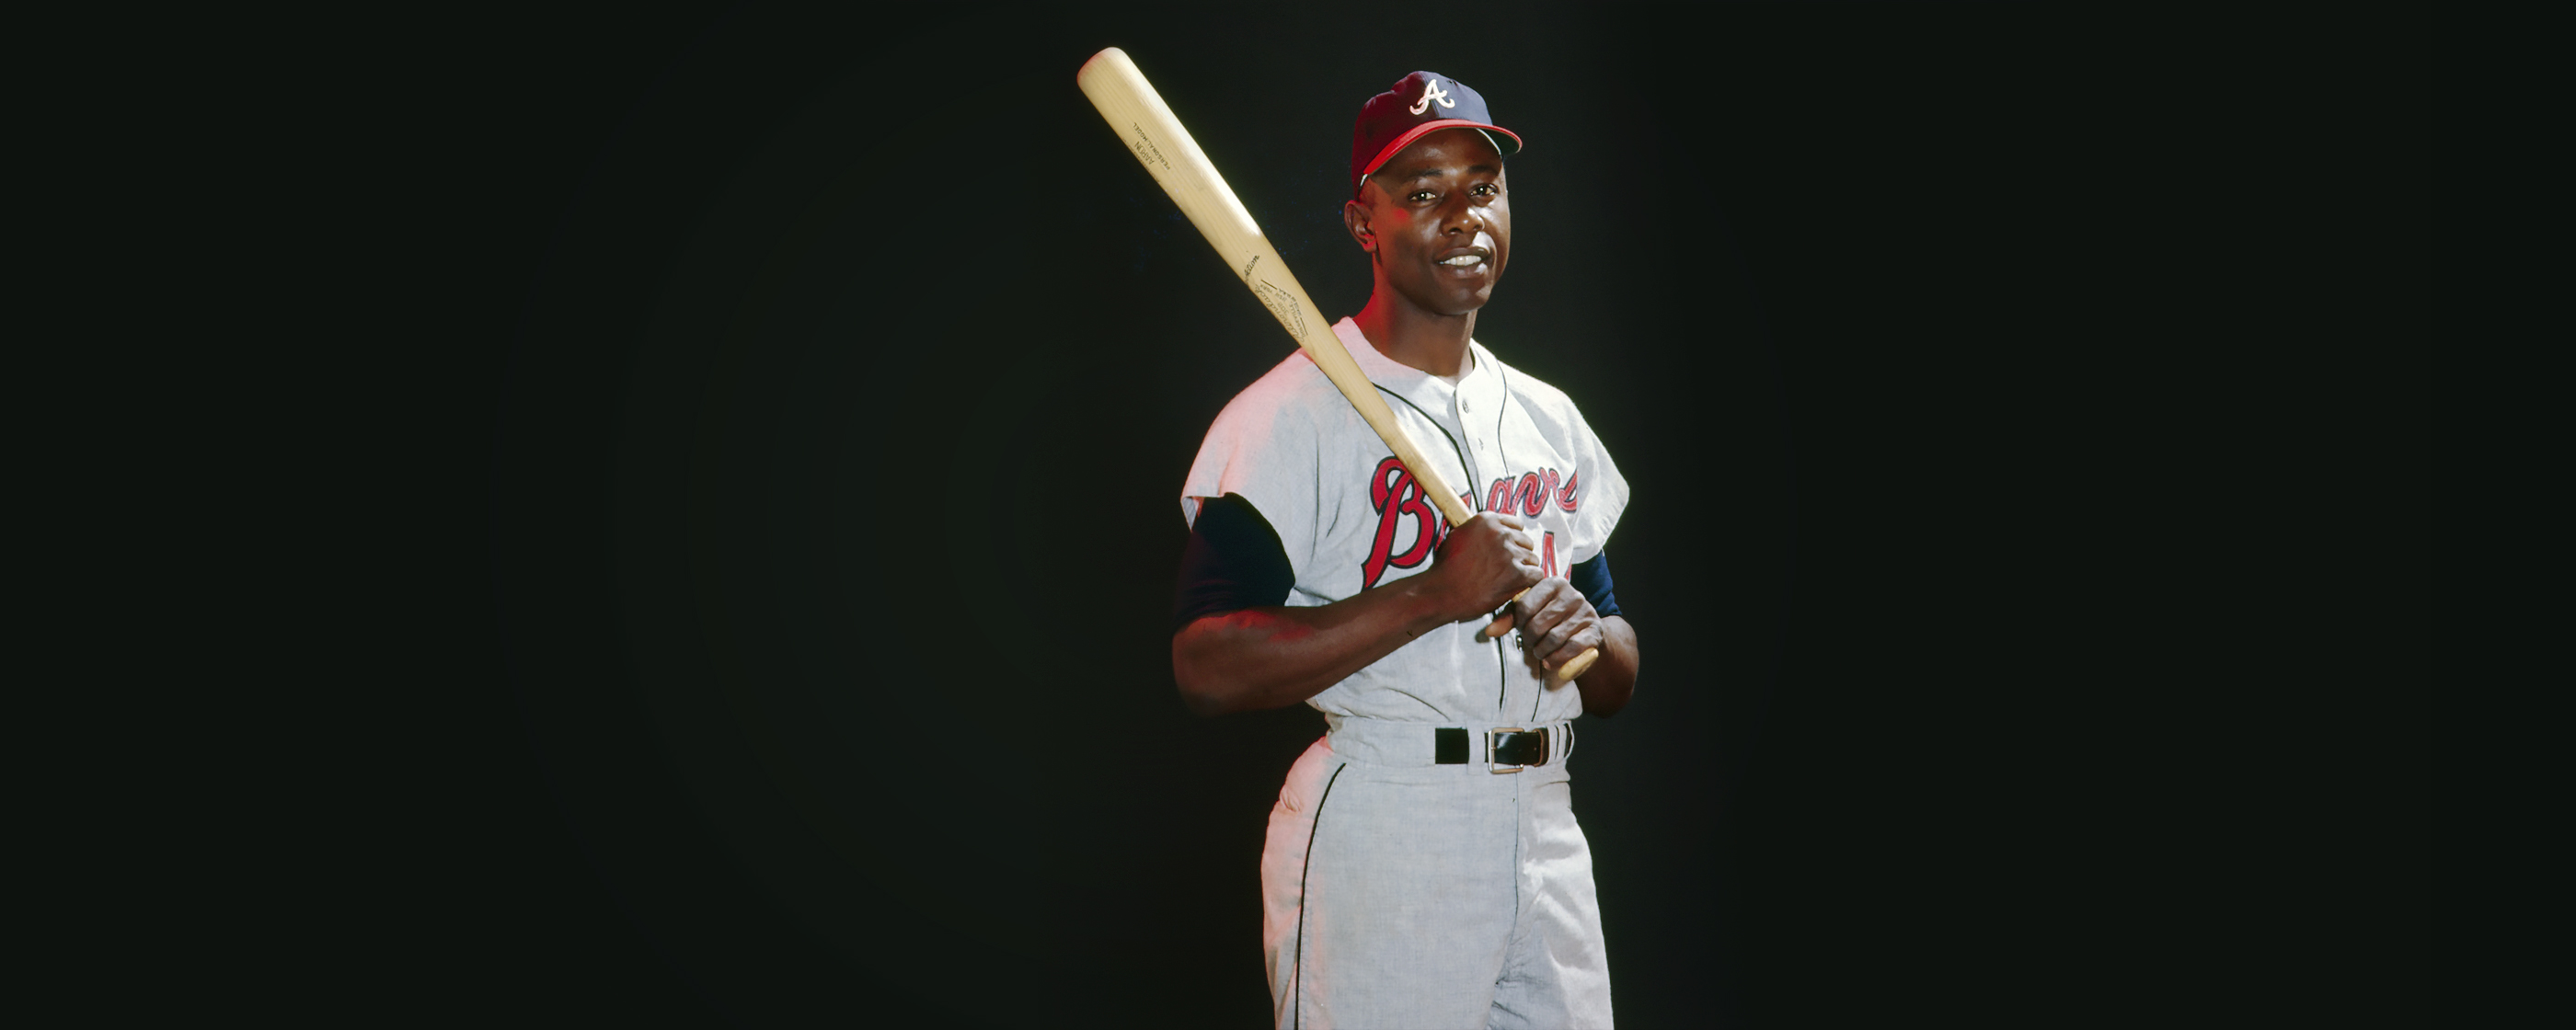 Hank Aaron collects RBI single in his final big league at-bat